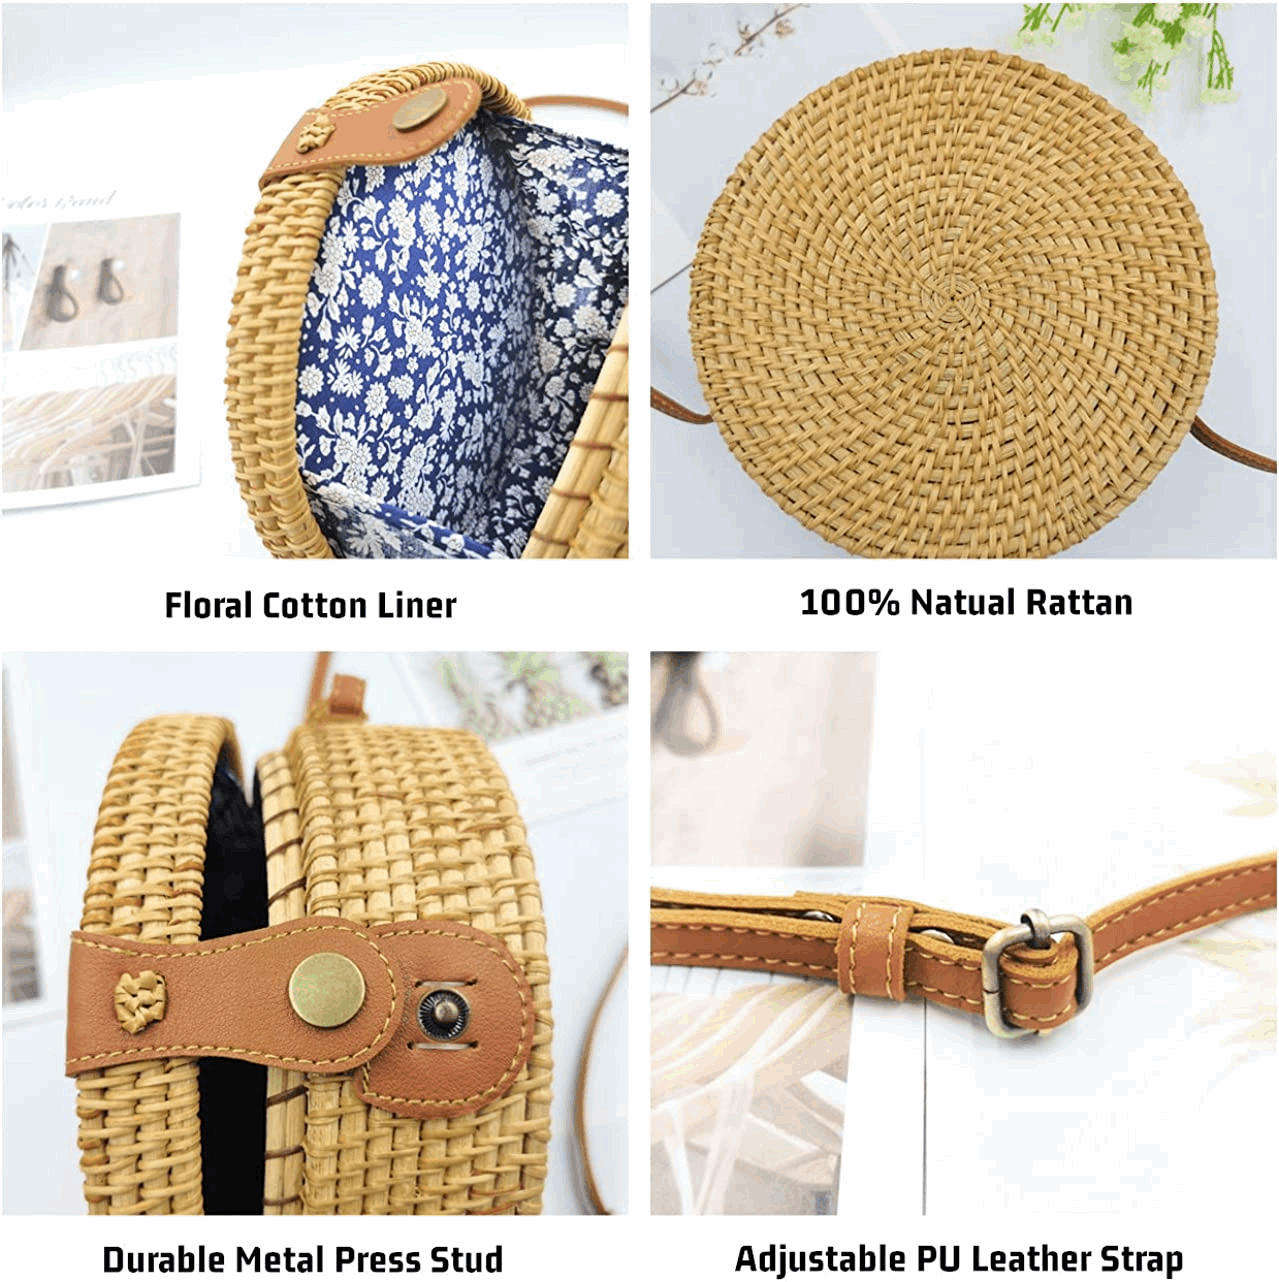 Handwoven round Rattan Bag for Women Bali Ata Straw Bags Adjustable Shoulder Leather Straps